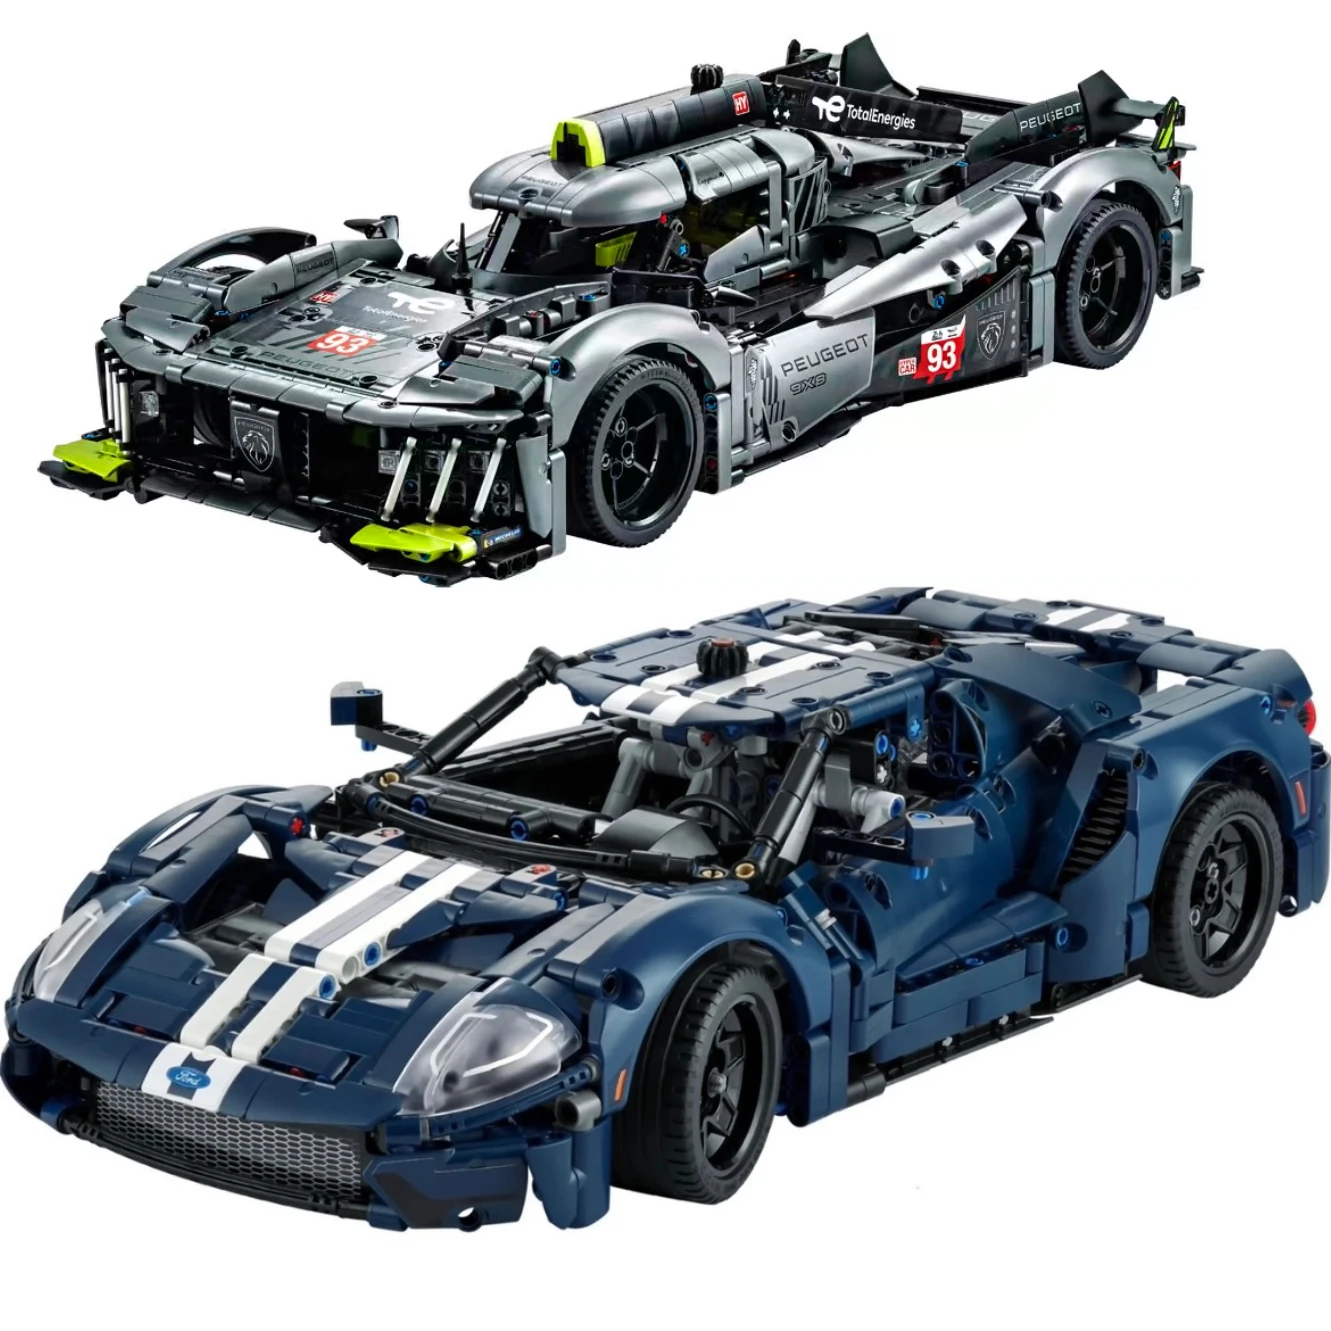 

Technical Peugeoted 9X8 24H Le Mans Hybrid Hypercar 1:10 Scale Model Race Car Building Kit Toys For Adult Boy Kid 42154 Fords GT